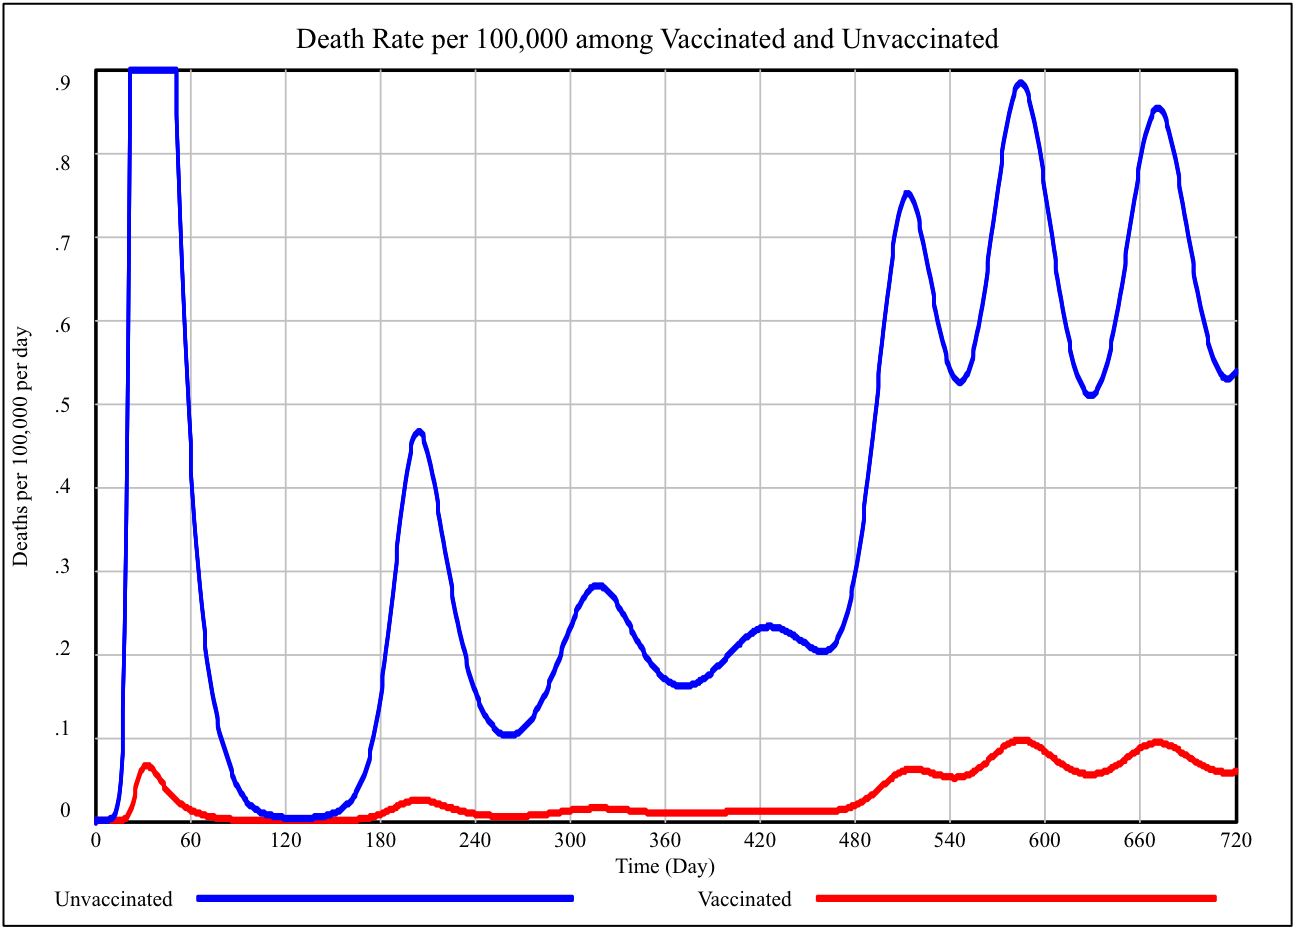 Figure 4: Comparison of death rates per 100,000 across all three phases of the Pandemic